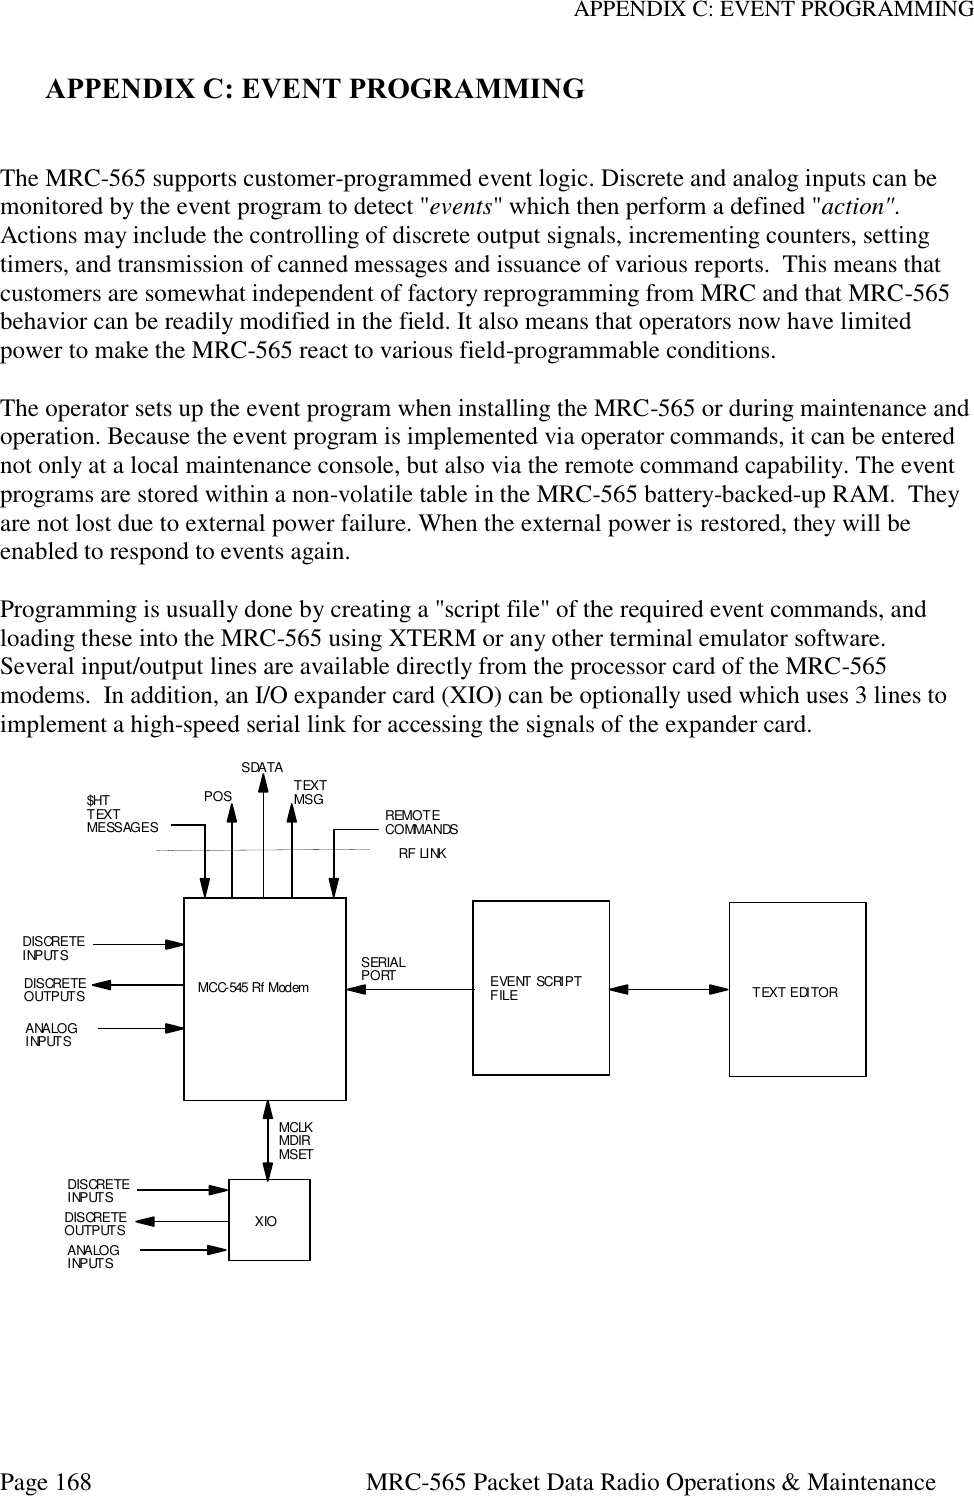 APPENDIX C: EVENT PROGRAMMING Page 168  MRC-565 Packet Data Radio Operations &amp; Maintenance APPENDIX C: EVENT PROGRAMMING   The MRC-565 supports customer-programmed event logic. Discrete and analog inputs can be monitored by the event program to detect &quot;events&quot; which then perform a defined &quot;action&quot;.  Actions may include the controlling of discrete output signals, incrementing counters, setting timers, and transmission of canned messages and issuance of various reports.  This means that customers are somewhat independent of factory reprogramming from MRC and that MRC-565 behavior can be readily modified in the field. It also means that operators now have limited power to make the MRC-565 react to various field-programmable conditions.  The operator sets up the event program when installing the MRC-565 or during maintenance and operation. Because the event program is implemented via operator commands, it can be entered not only at a local maintenance console, but also via the remote command capability. The event programs are stored within a non-volatile table in the MRC-565 battery-backed-up RAM.  They are not lost due to external power failure. When the external power is restored, they will be enabled to respond to events again.  Programming is usually done by creating a &quot;script file&quot; of the required event commands, and loading these into the MRC-565 using XTERM or any other terminal emulator software. Several input/output lines are available directly from the processor card of the MRC-565 modems.  In addition, an I/O expander card (XIO) can be optionally used which uses 3 lines to implement a high-speed serial link for accessing the signals of the expander card.     MCC-545 Rf Modem EVENT SCRIPTFILE TEXT EDITORXIO$HTTEXTMESSAGES REMOTECOMMANDSDISCRETEINPUTSDISCRETEOUTPUTSANALOGINPUTSDISCRETEINPUTSDISCRETEOUTPUTSANALOGINPUTSRF LINKSERIALPORTMCLKMDIRMSETPOS TEXTMSGSDATA